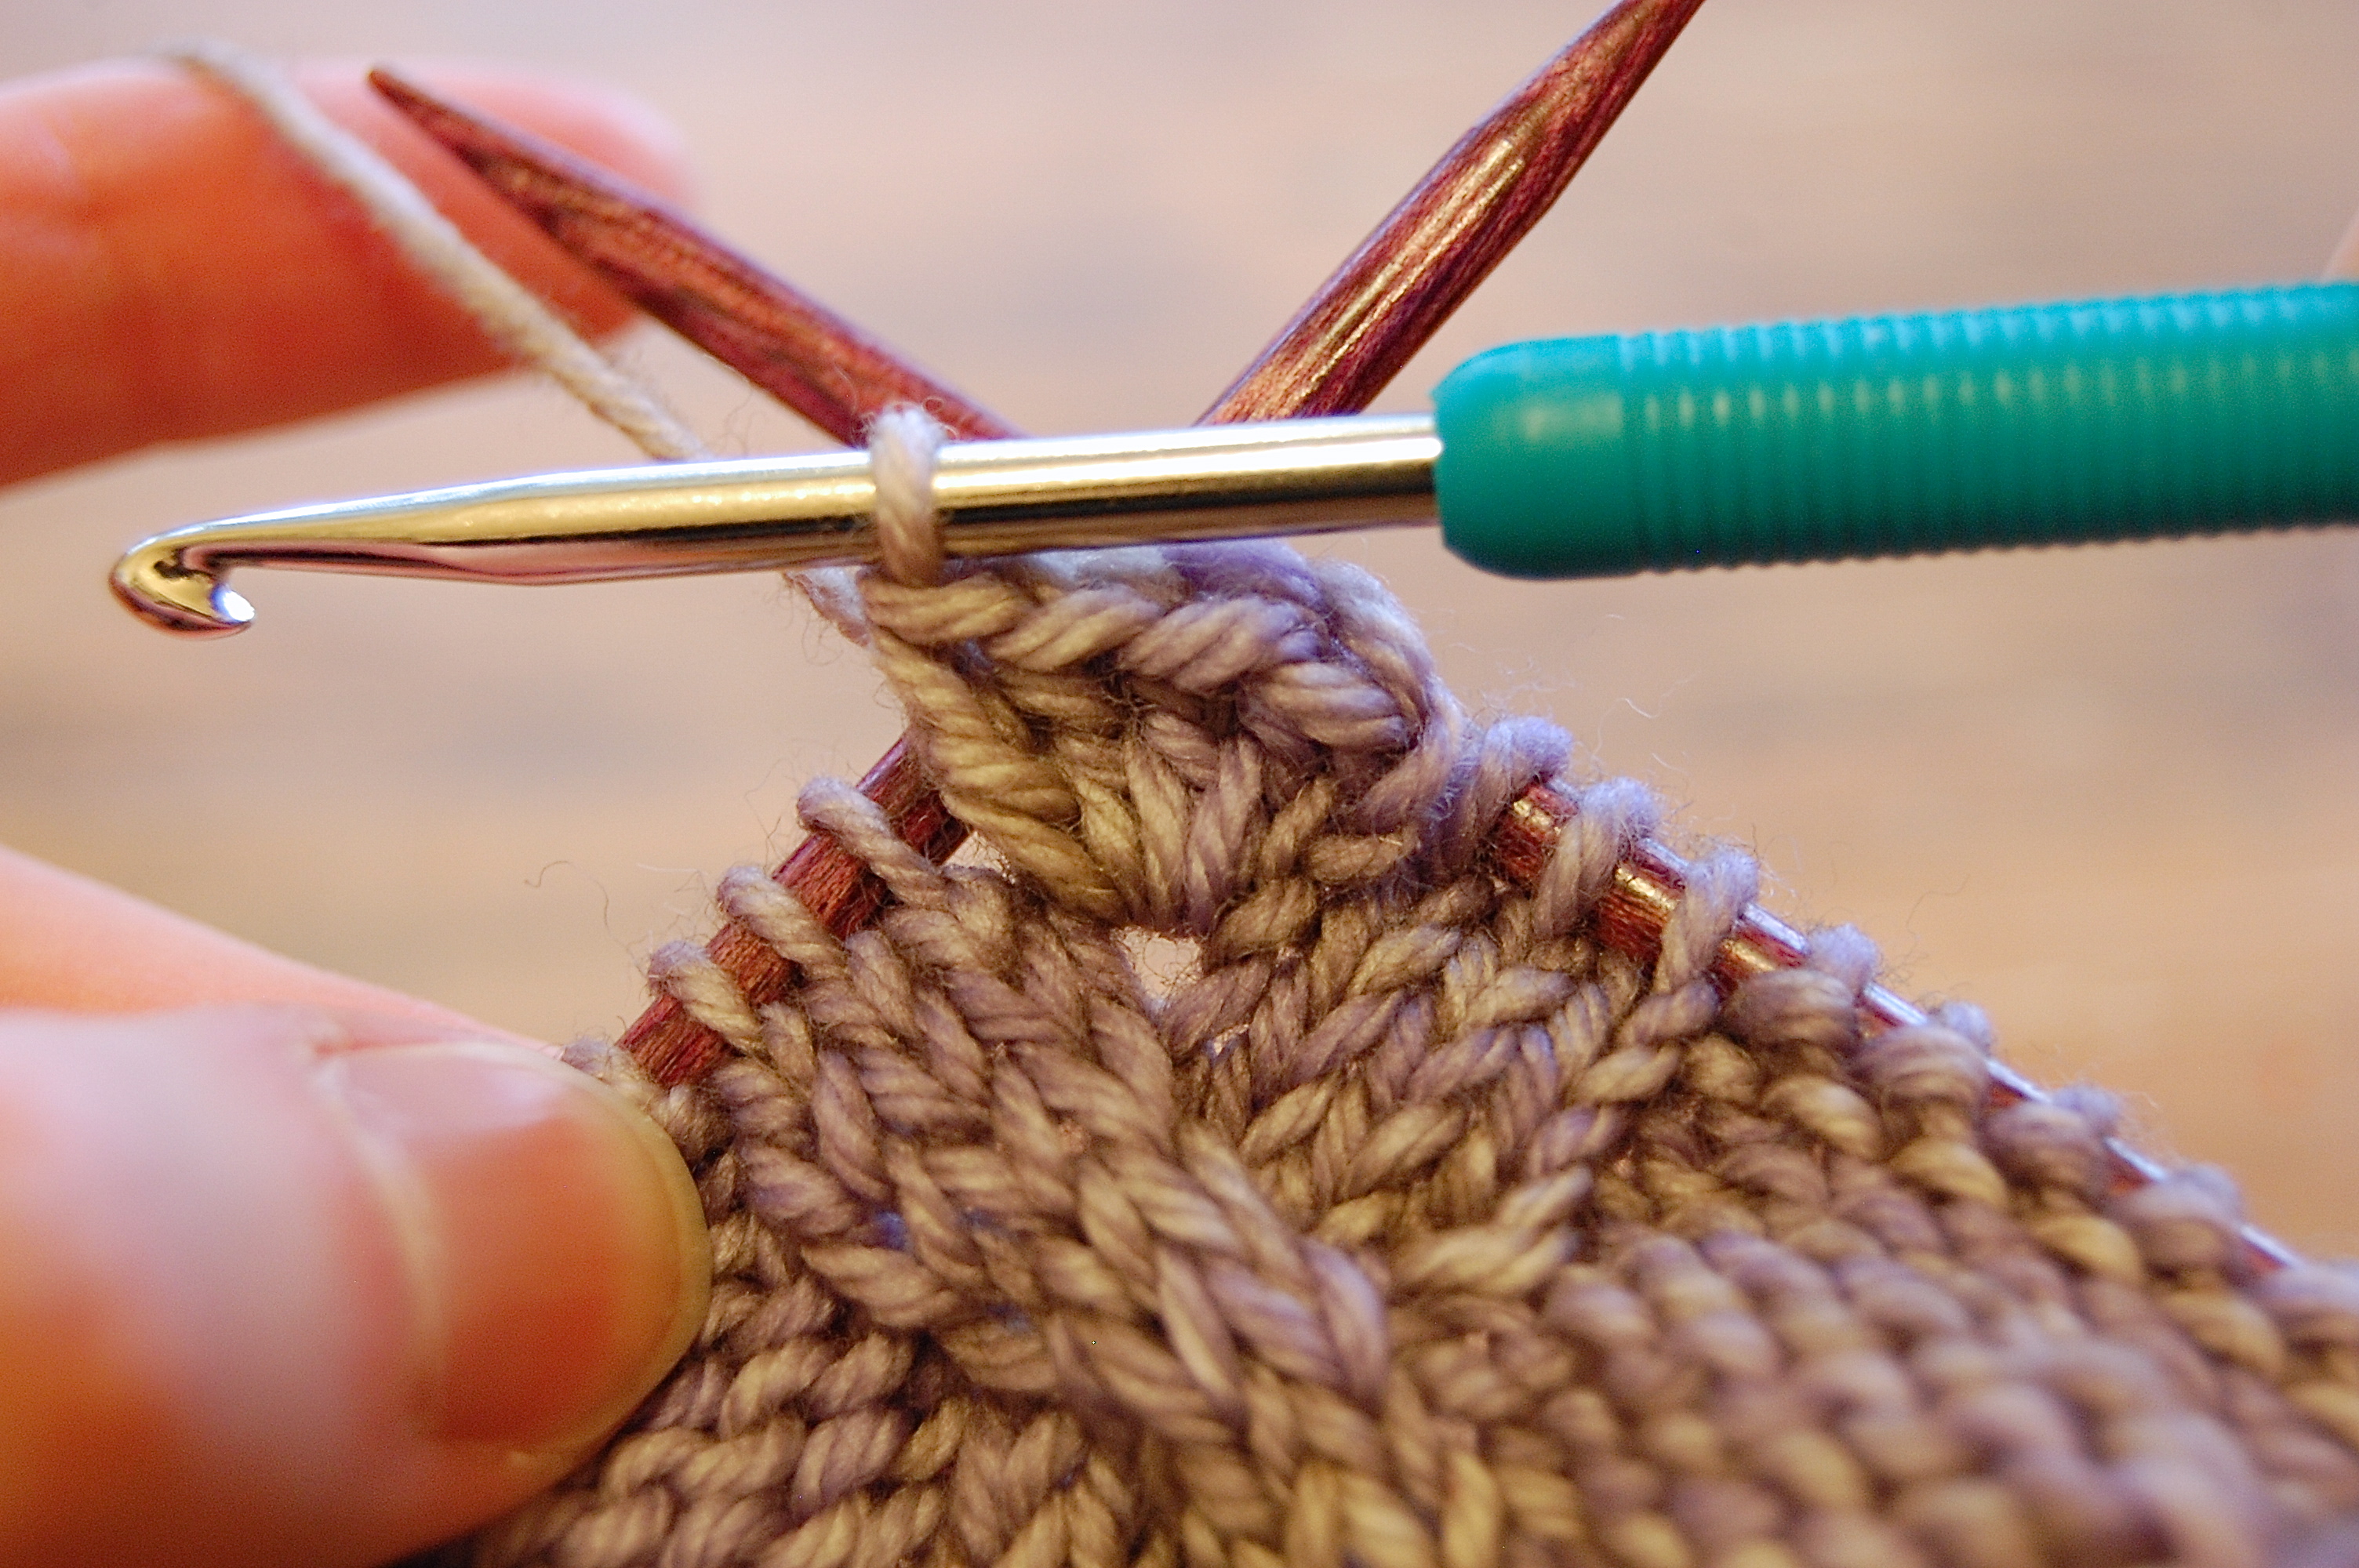 crocheting a bobble in a knitting project